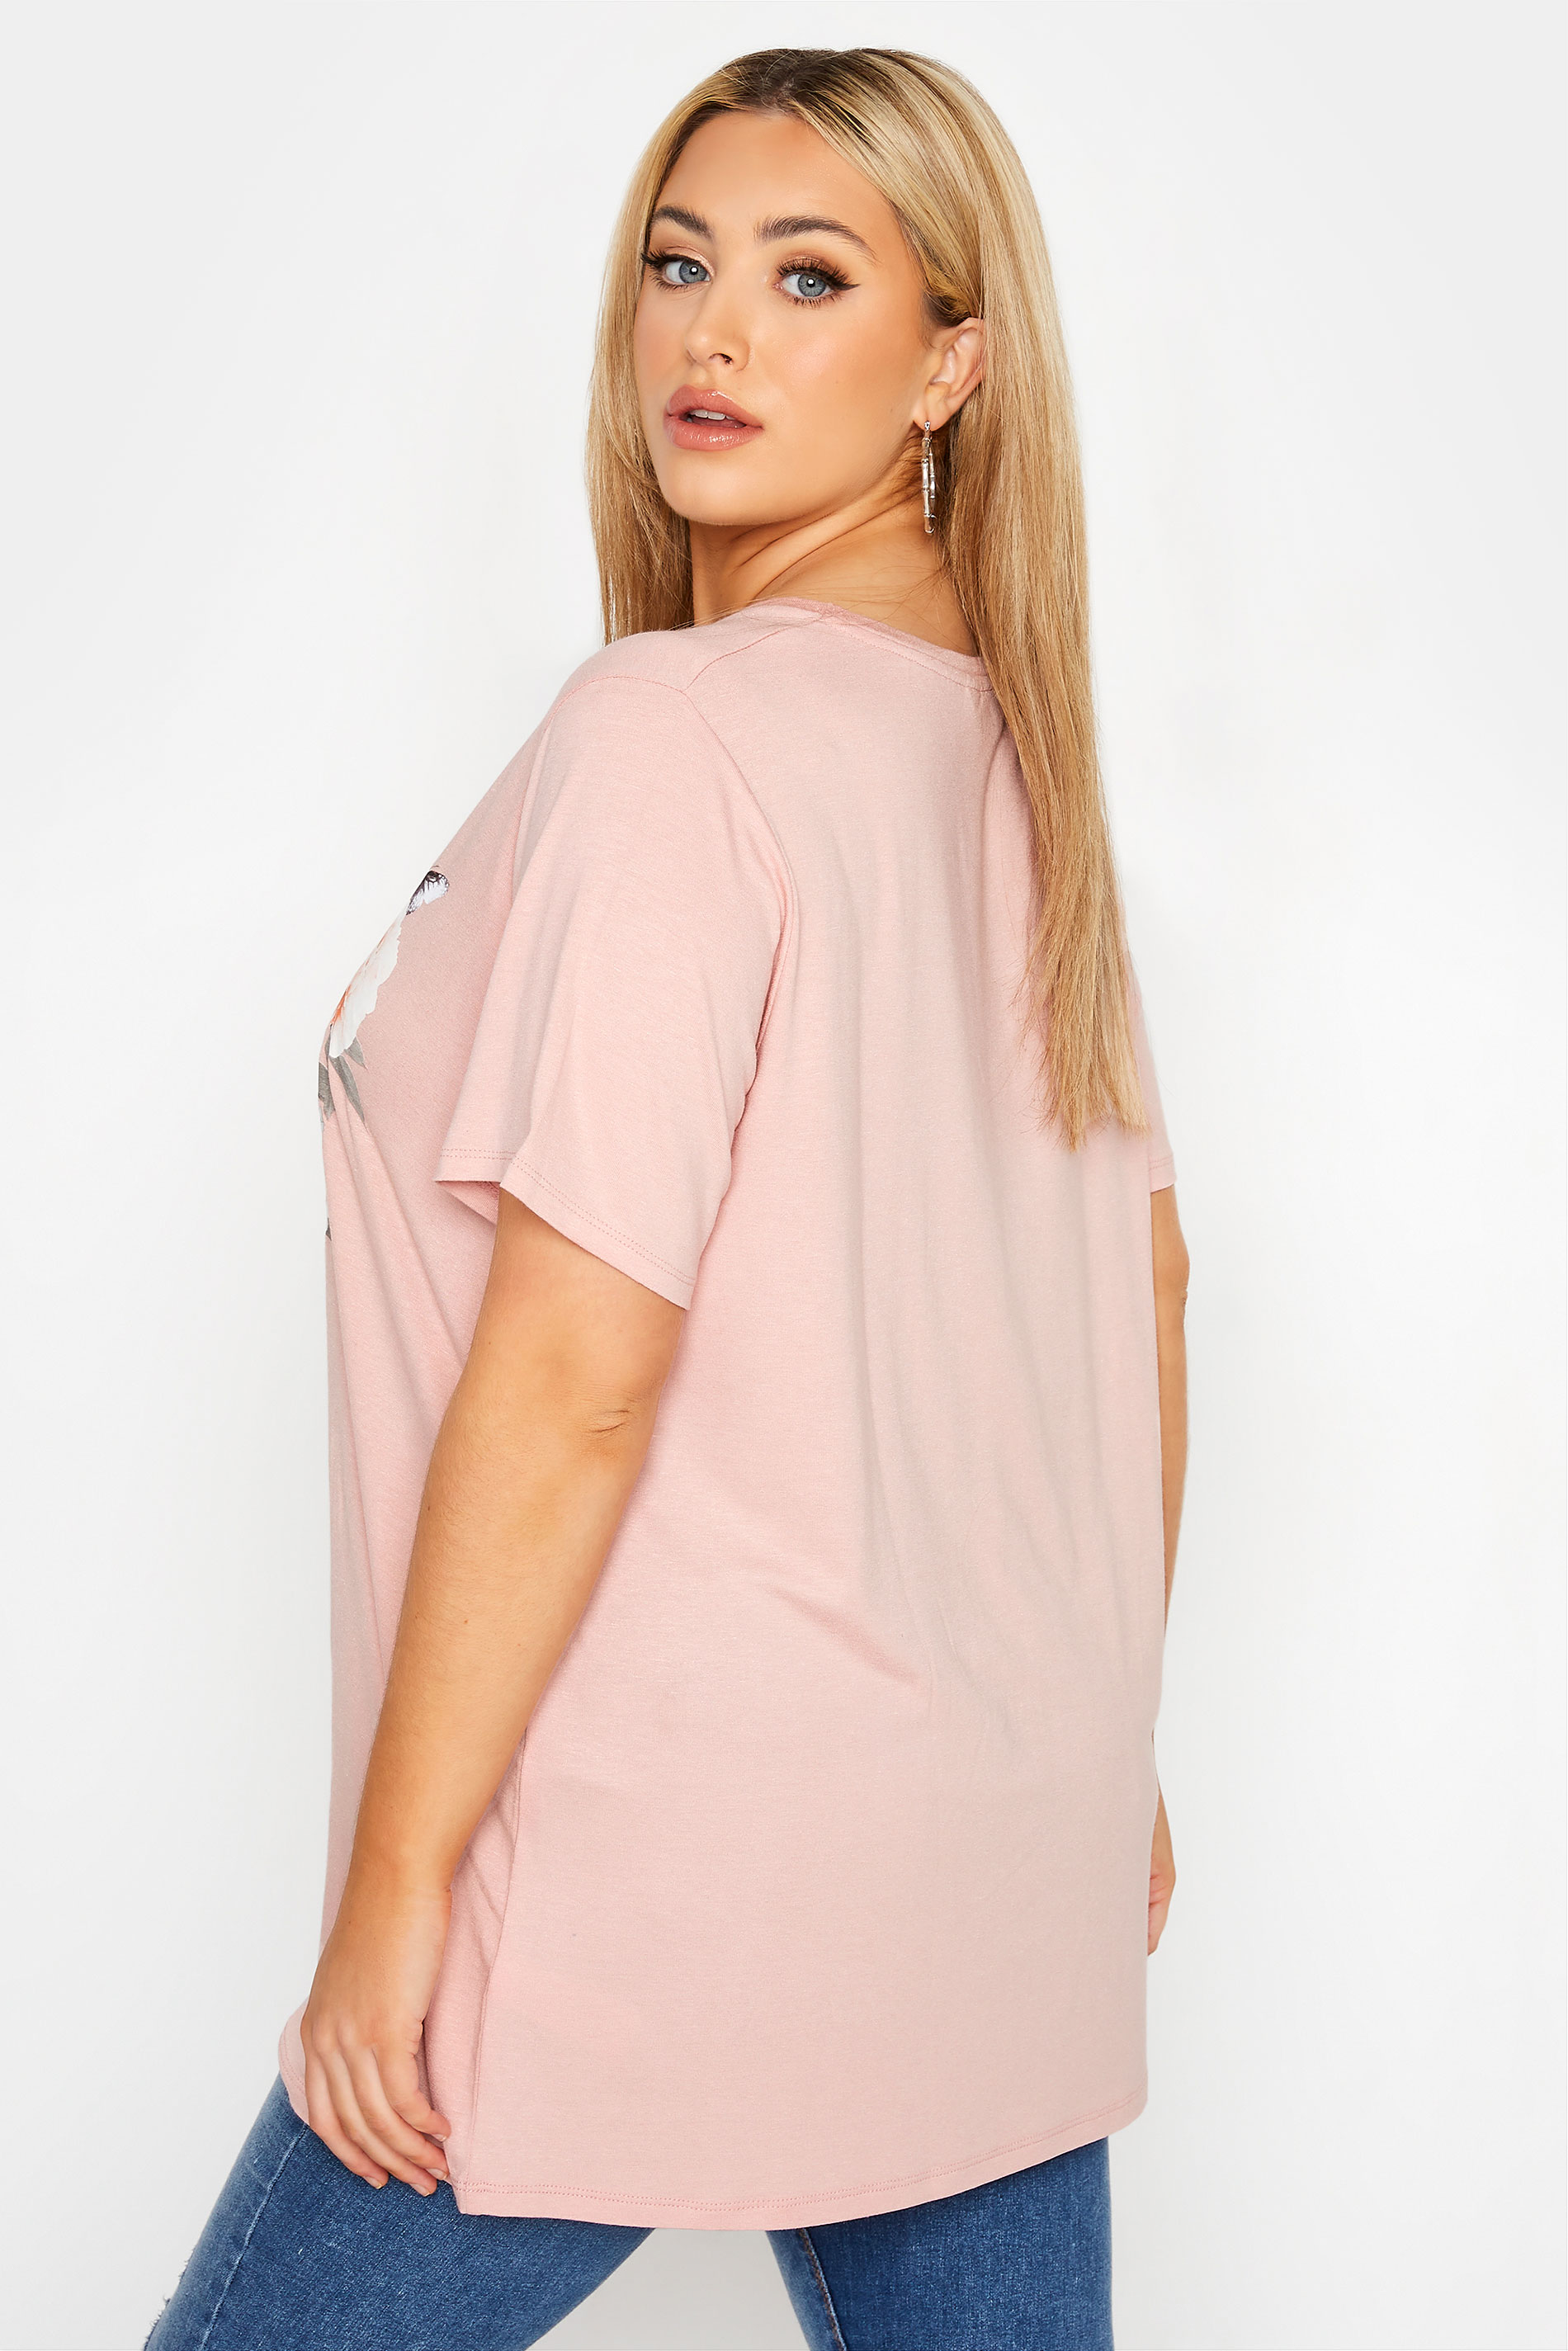 Grande taille  Tops Grande taille  T-Shirts | T-Shirt Rose Imprimé Coeur 'So Glamorous' - VG05787